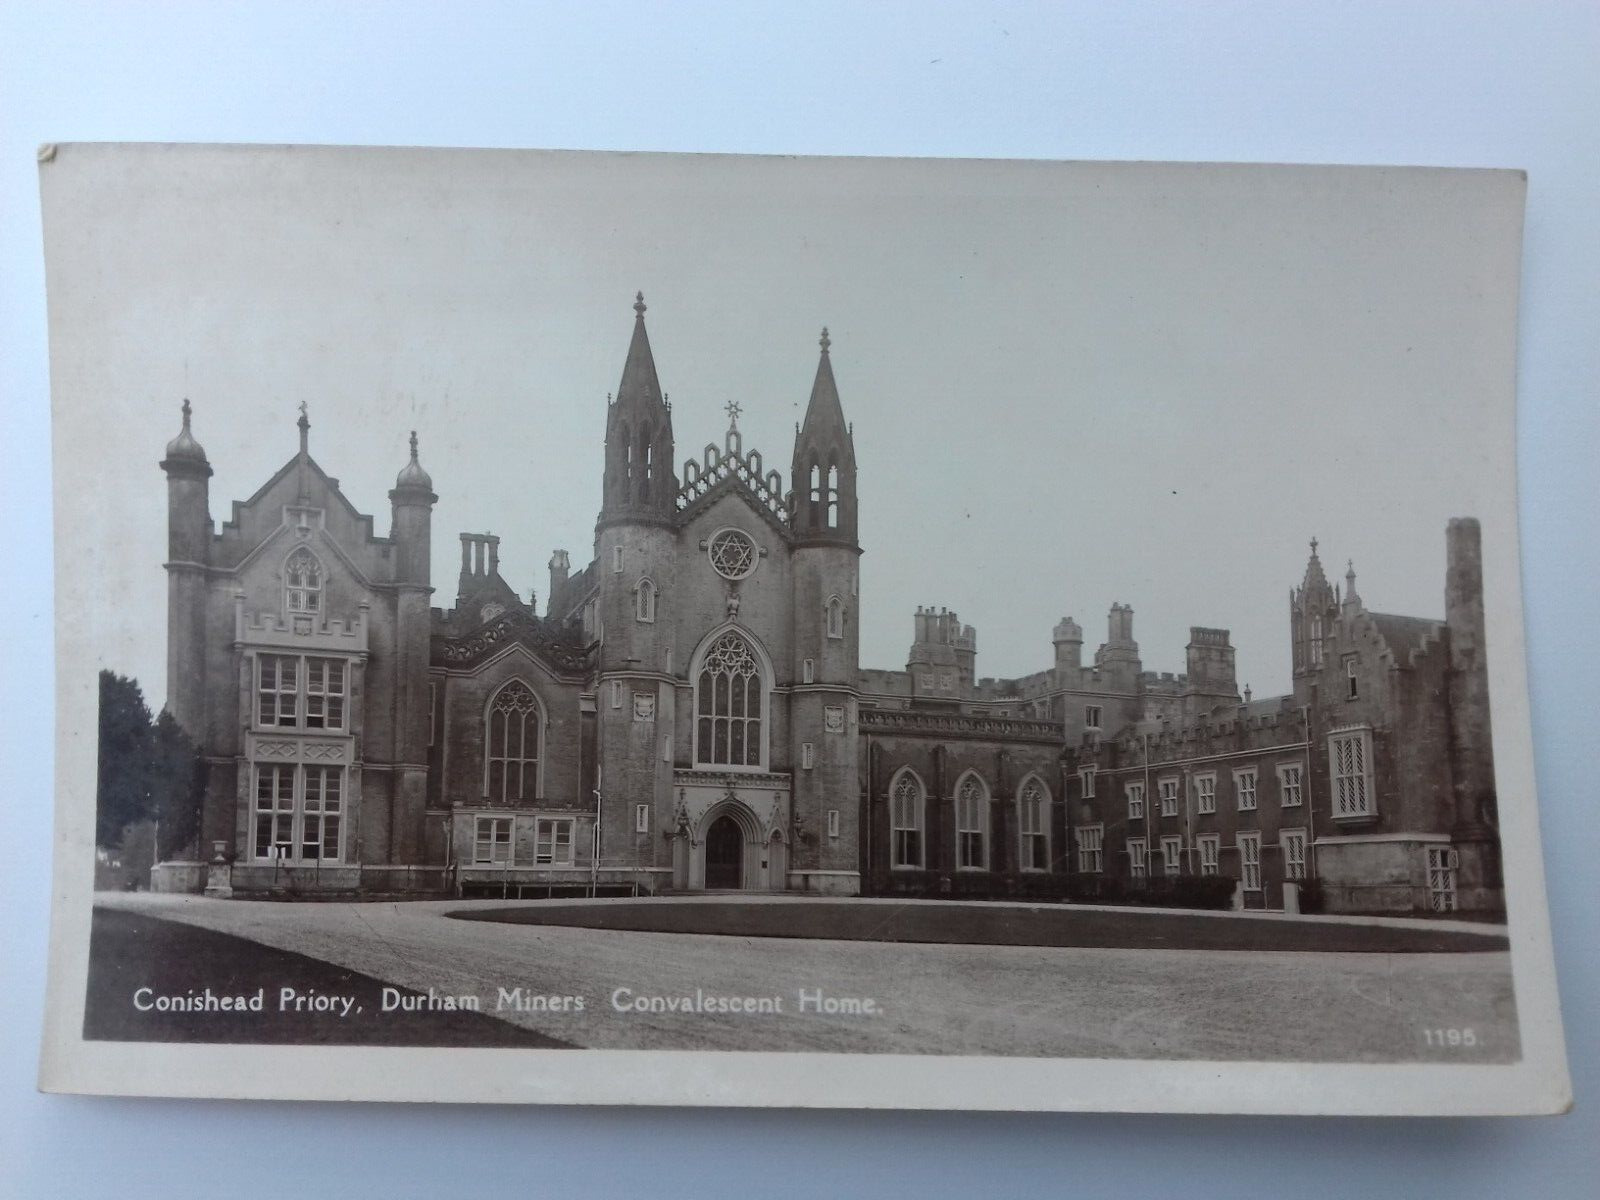 House Clearance - Service - Conishead Priory, Durham Miners Convalescent Home, RP (220061)